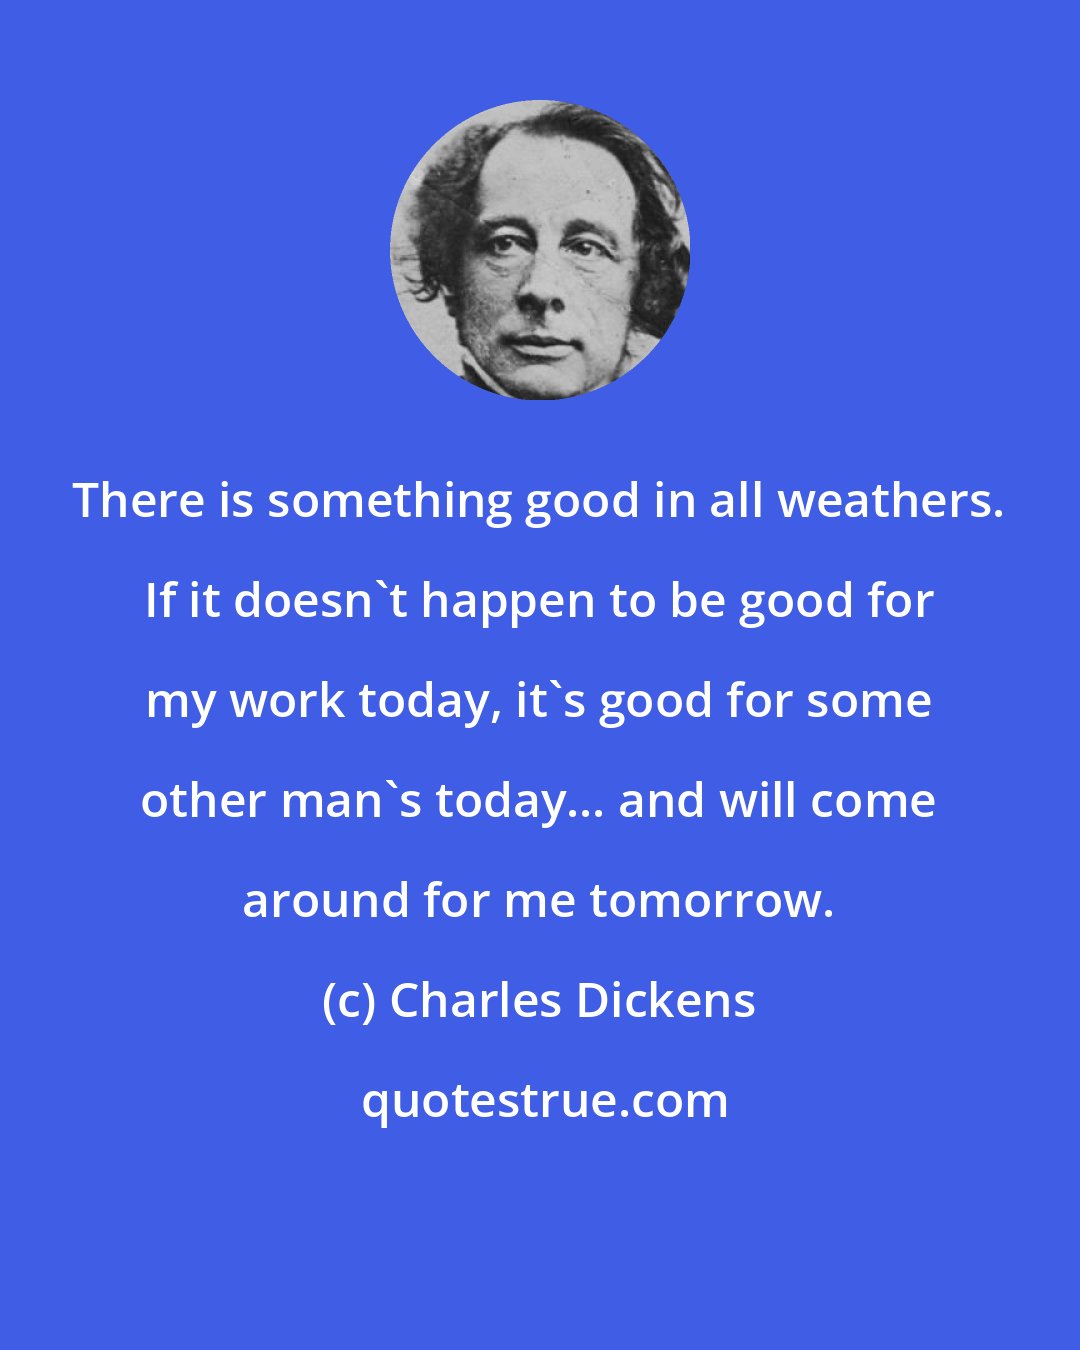 Charles Dickens: There is something good in all weathers. If it doesn't happen to be good for my work today, it's good for some other man's today... and will come around for me tomorrow.